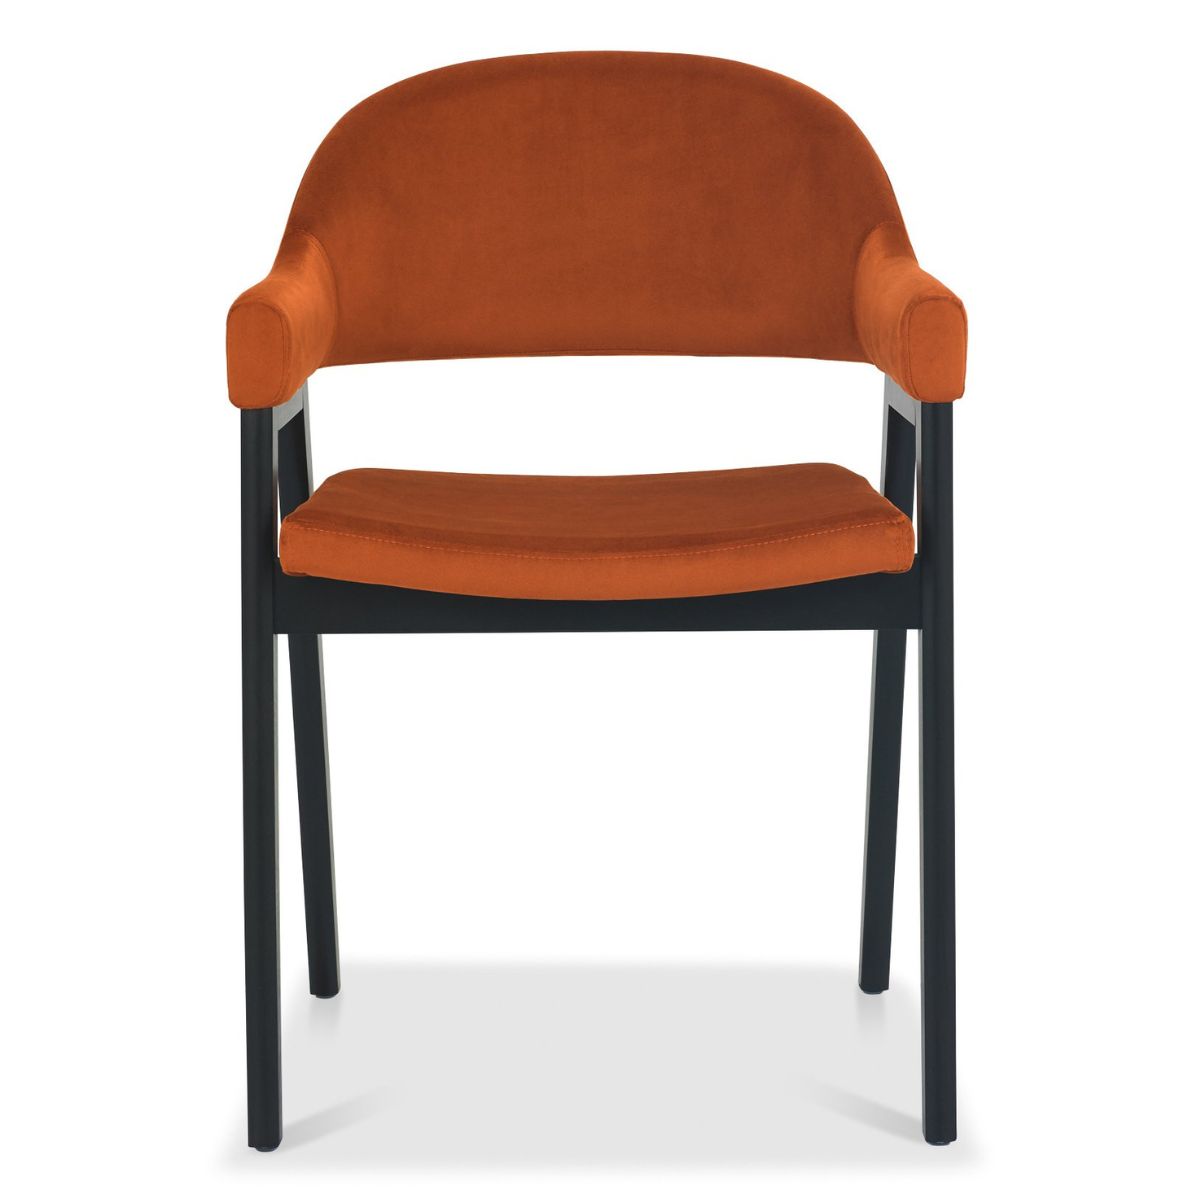 Chambery Weathered Oak Curved Back Dining Chair Orange - 2